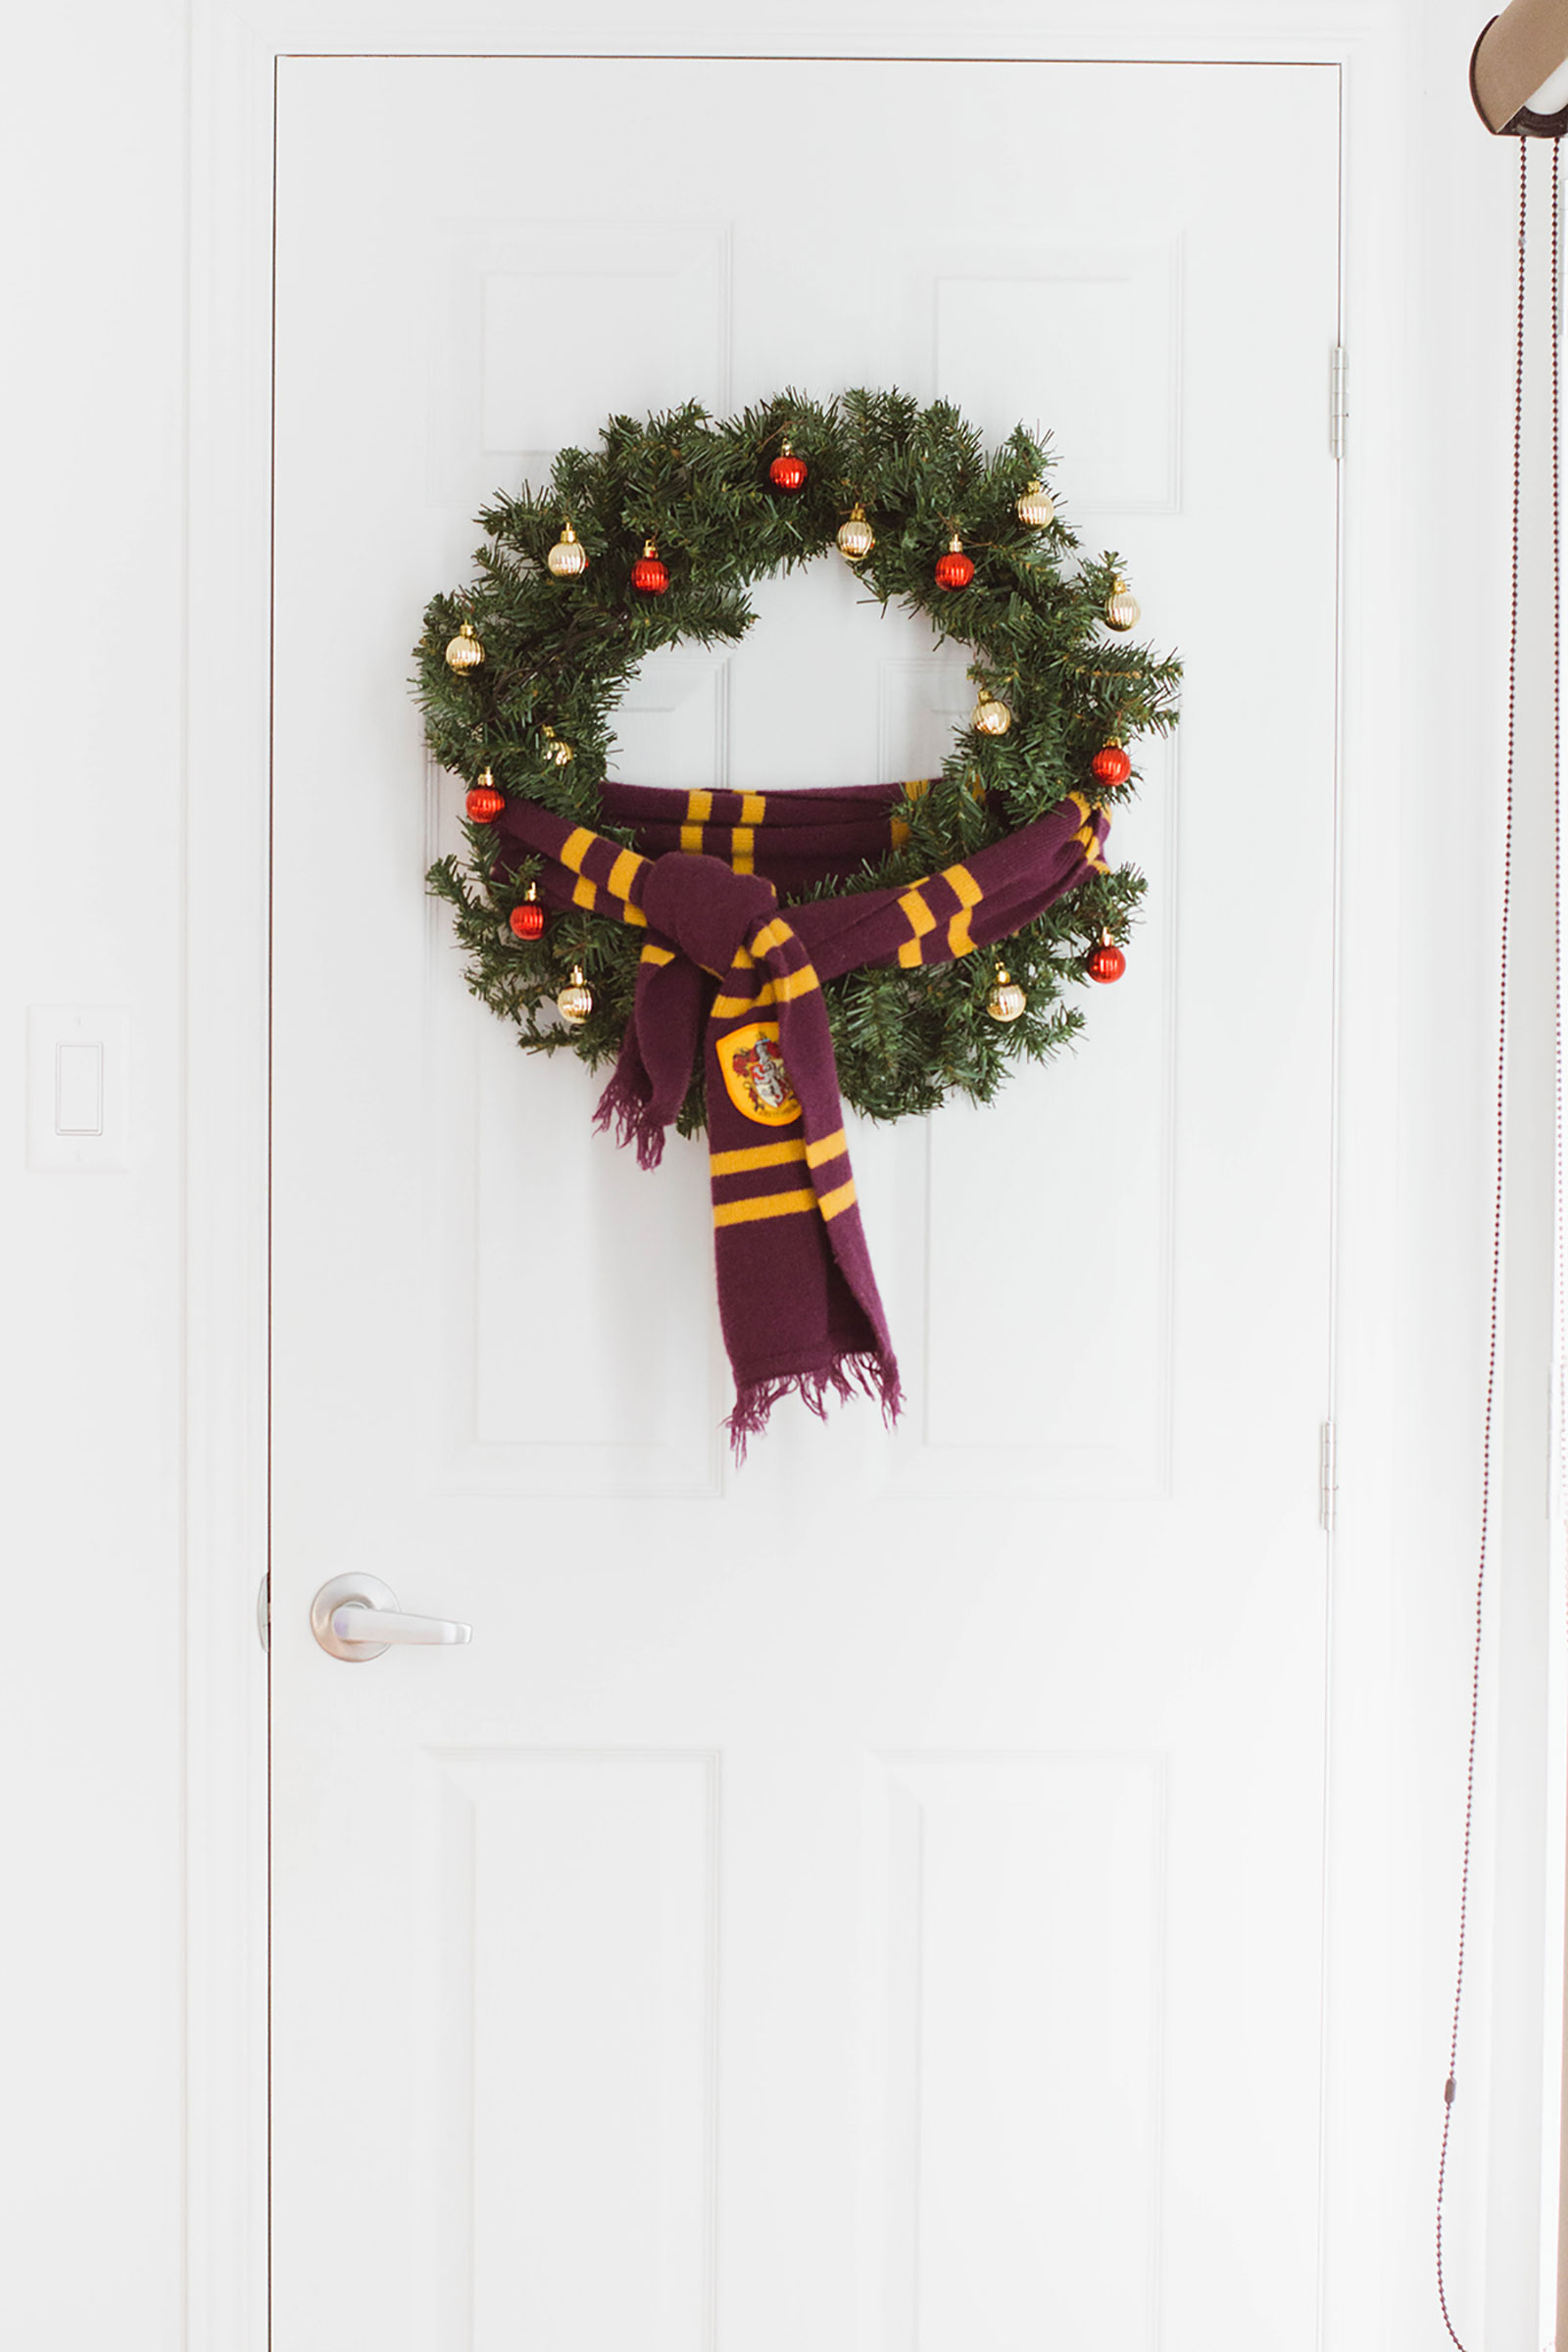 Holiday decor totally inspired by Harry Potter!